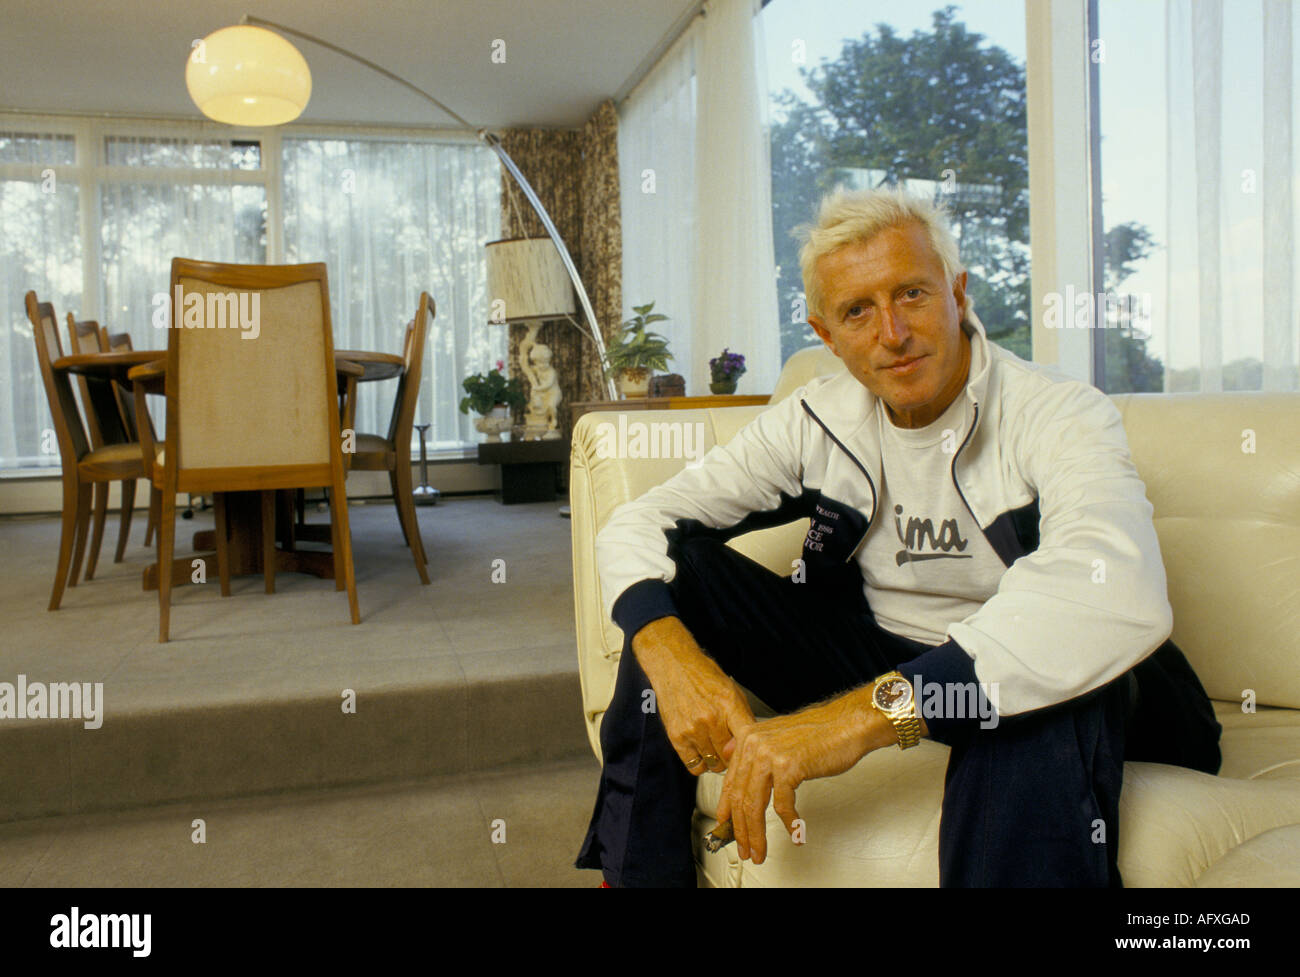 Jimmy Savile British entertainer disc jockey TV radio broadcaster seen his flat overlooking Roundhay Park. Leeds England UK Late1980s or early 1990s. Stock Photo